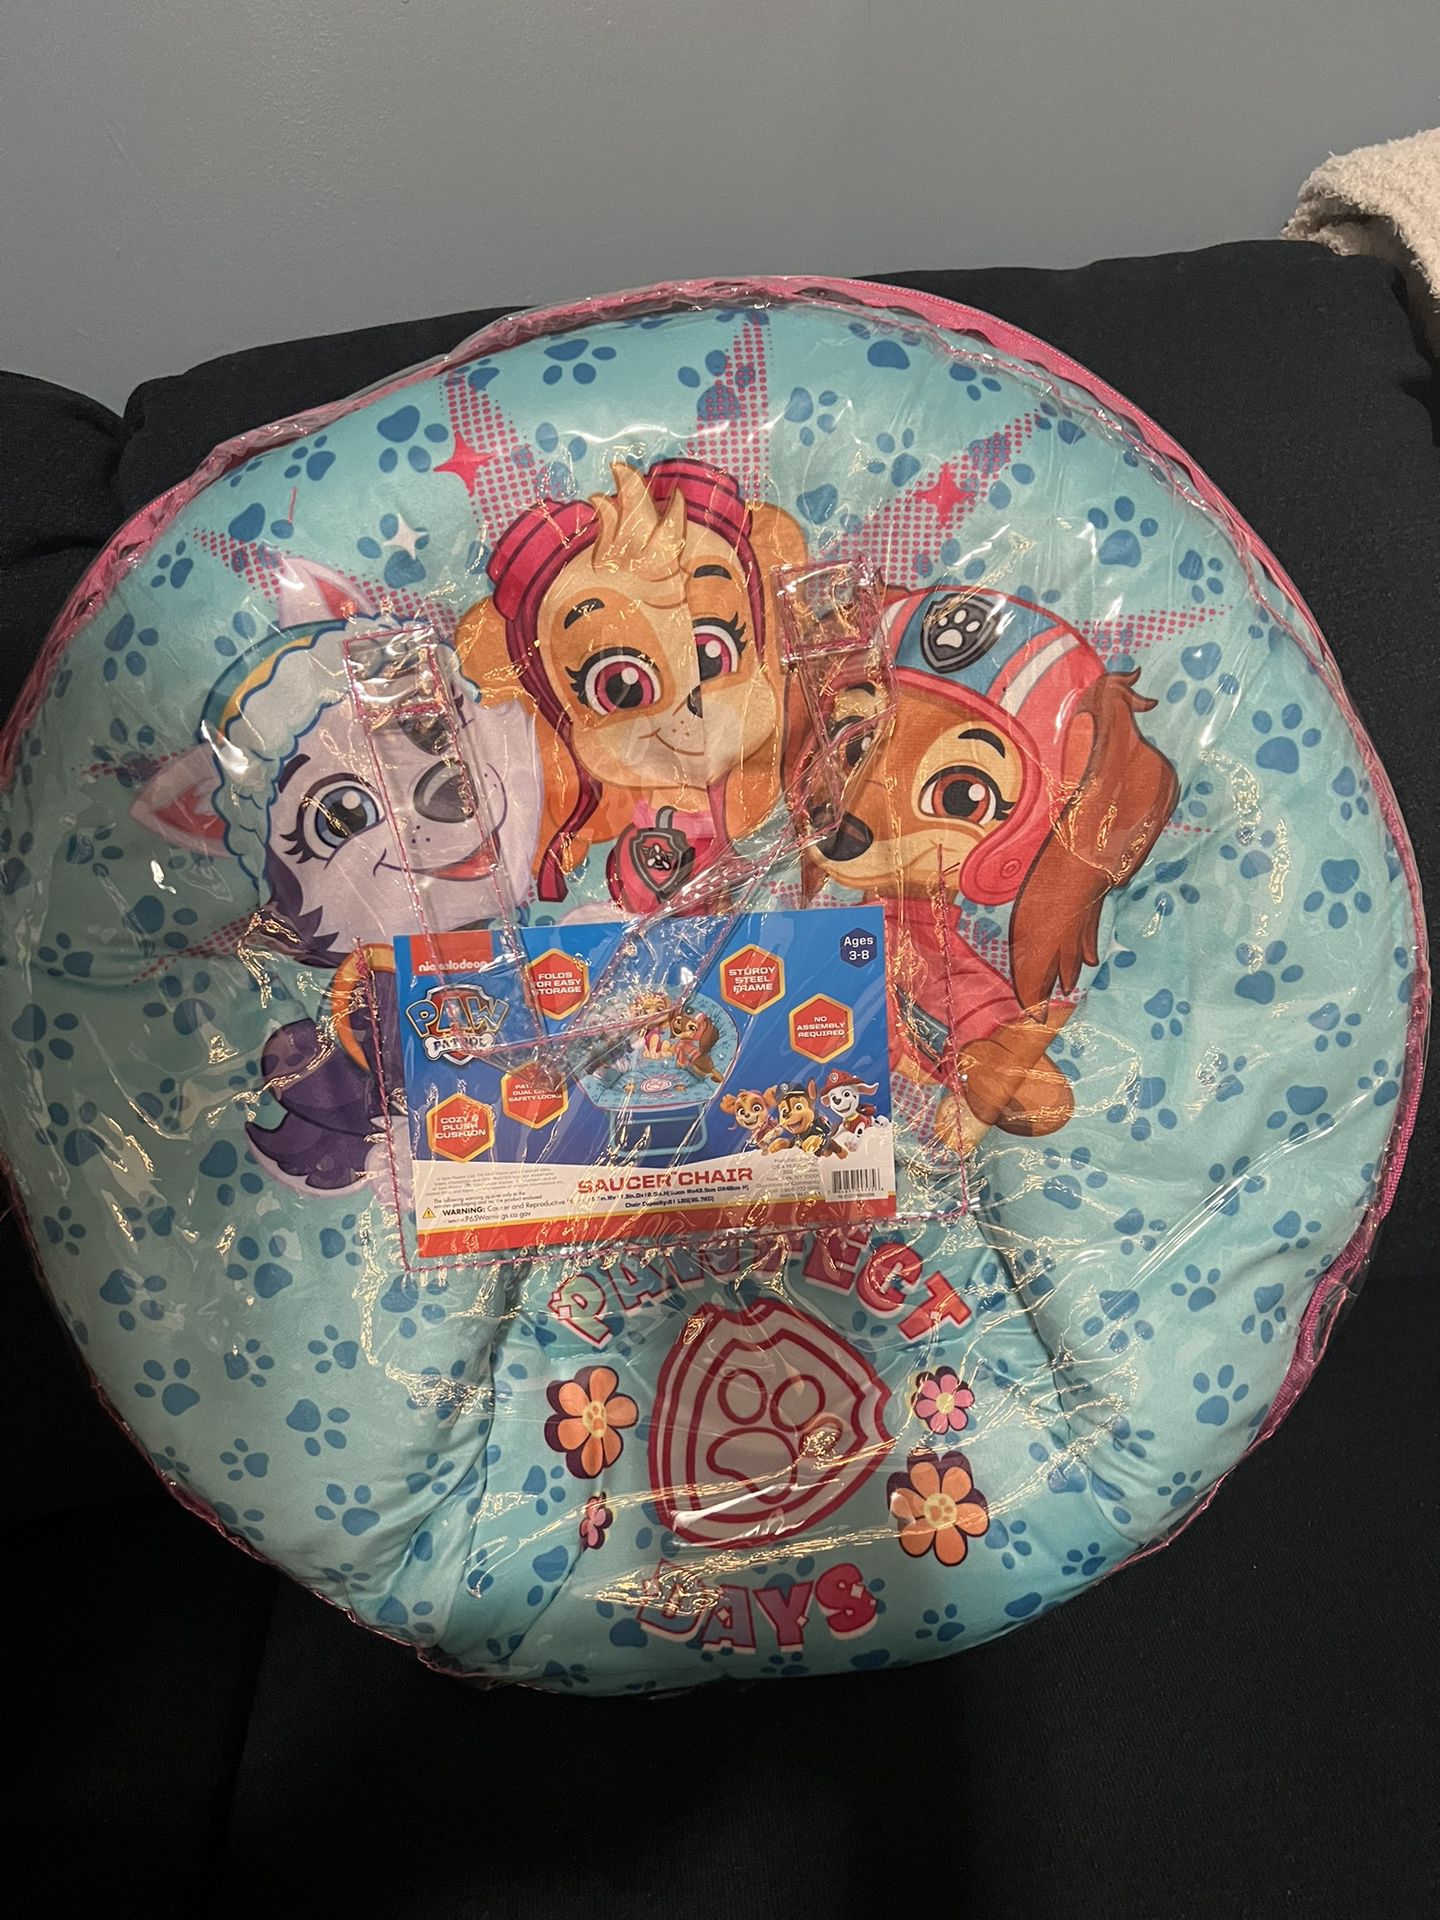 Nickelodeon's Paw Patrol 19" Toddler Mini Saucer Chair, Polyester